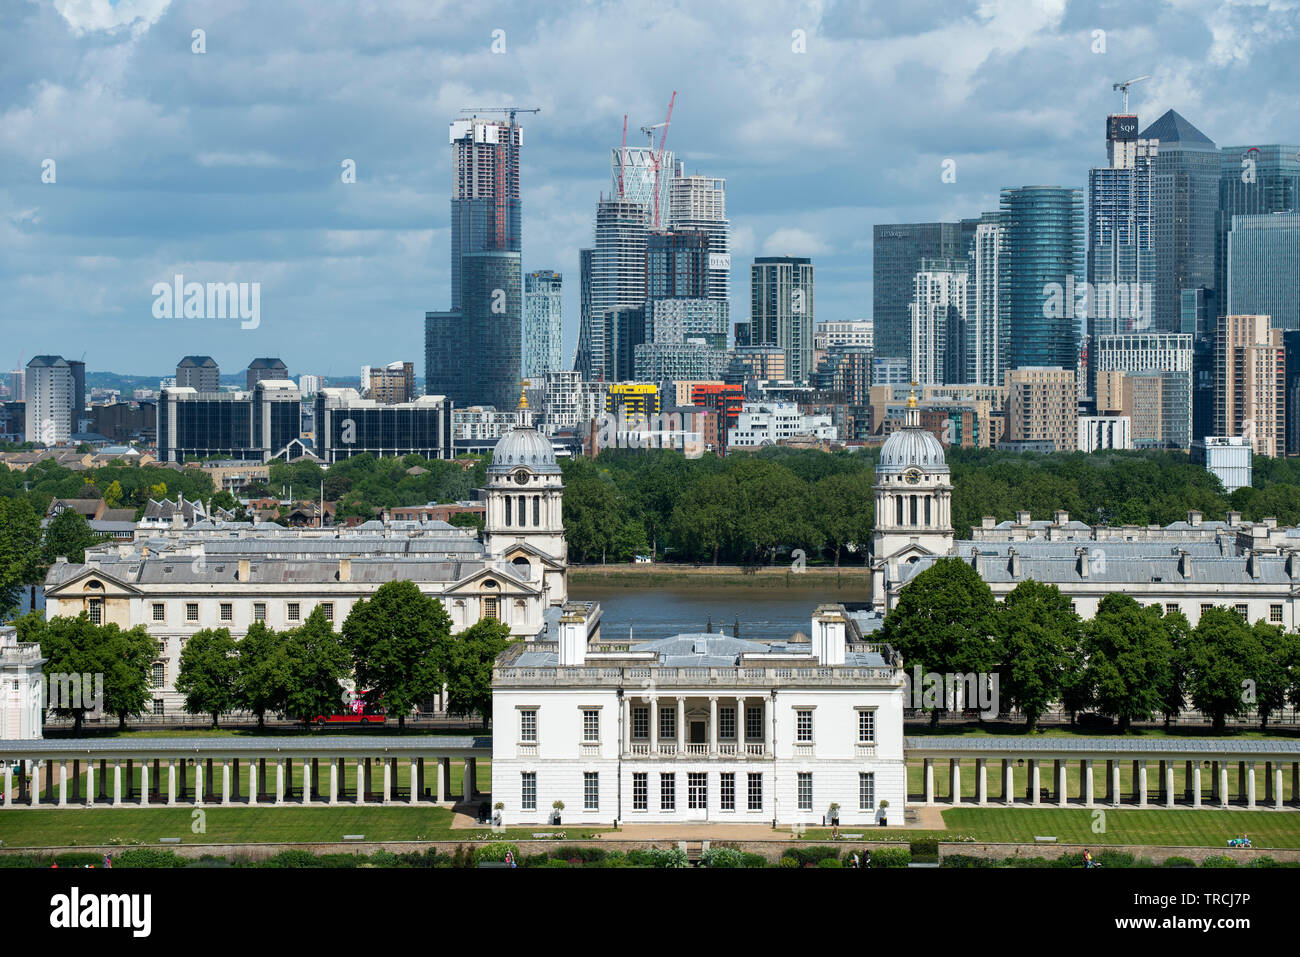 London England UK. Canary Wharf and Queen's House Greenwich photographed from Greenwich Park in South East London. May 2019 Stock Photo